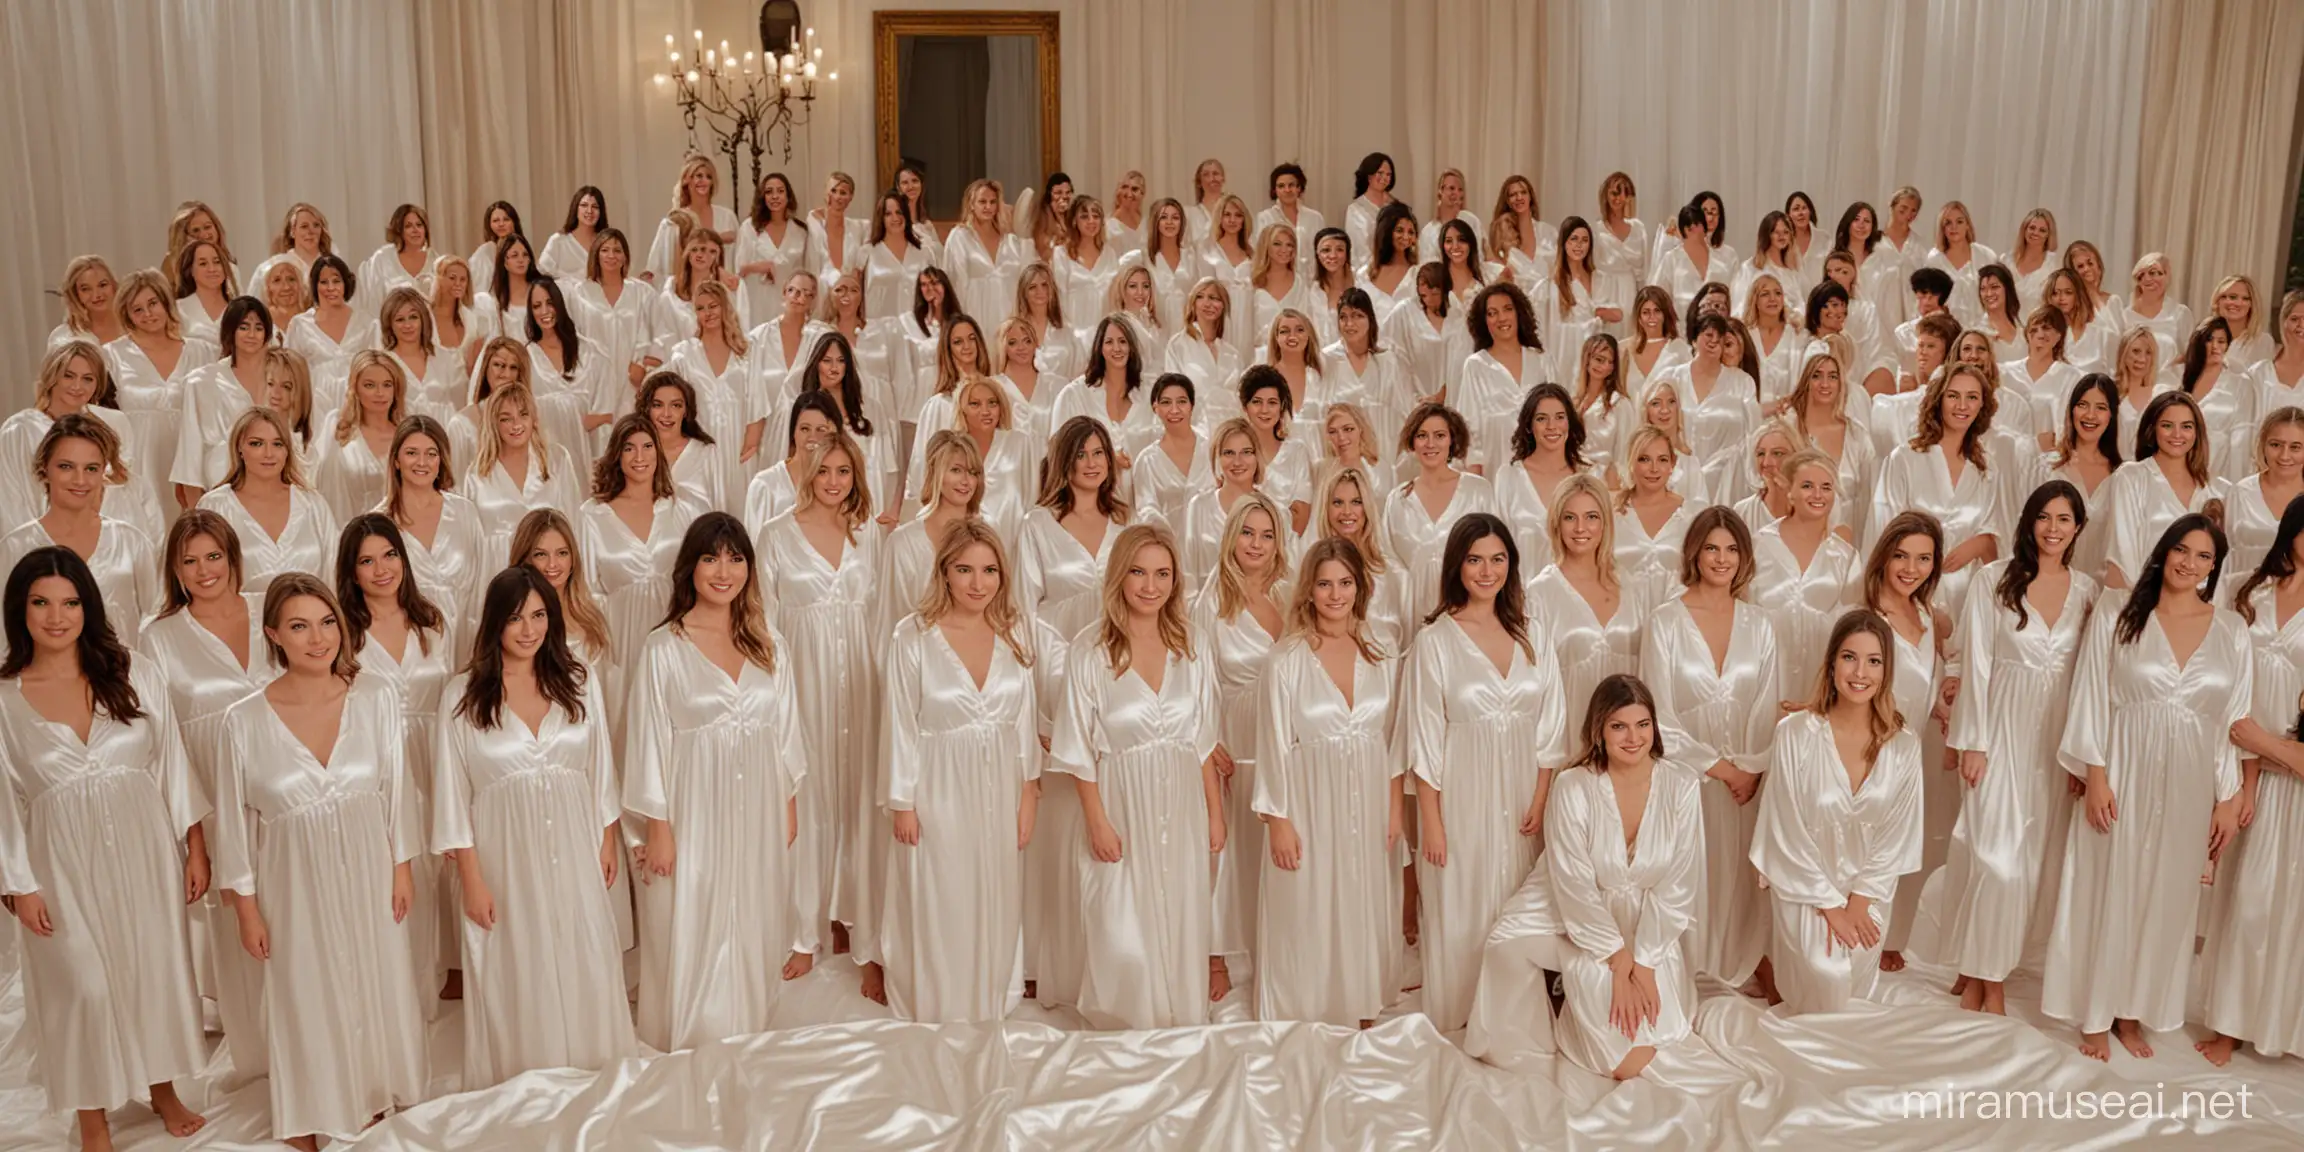 Elegant Women in Creamy White Satin Nightgowns Posing on a Luxurious Bed